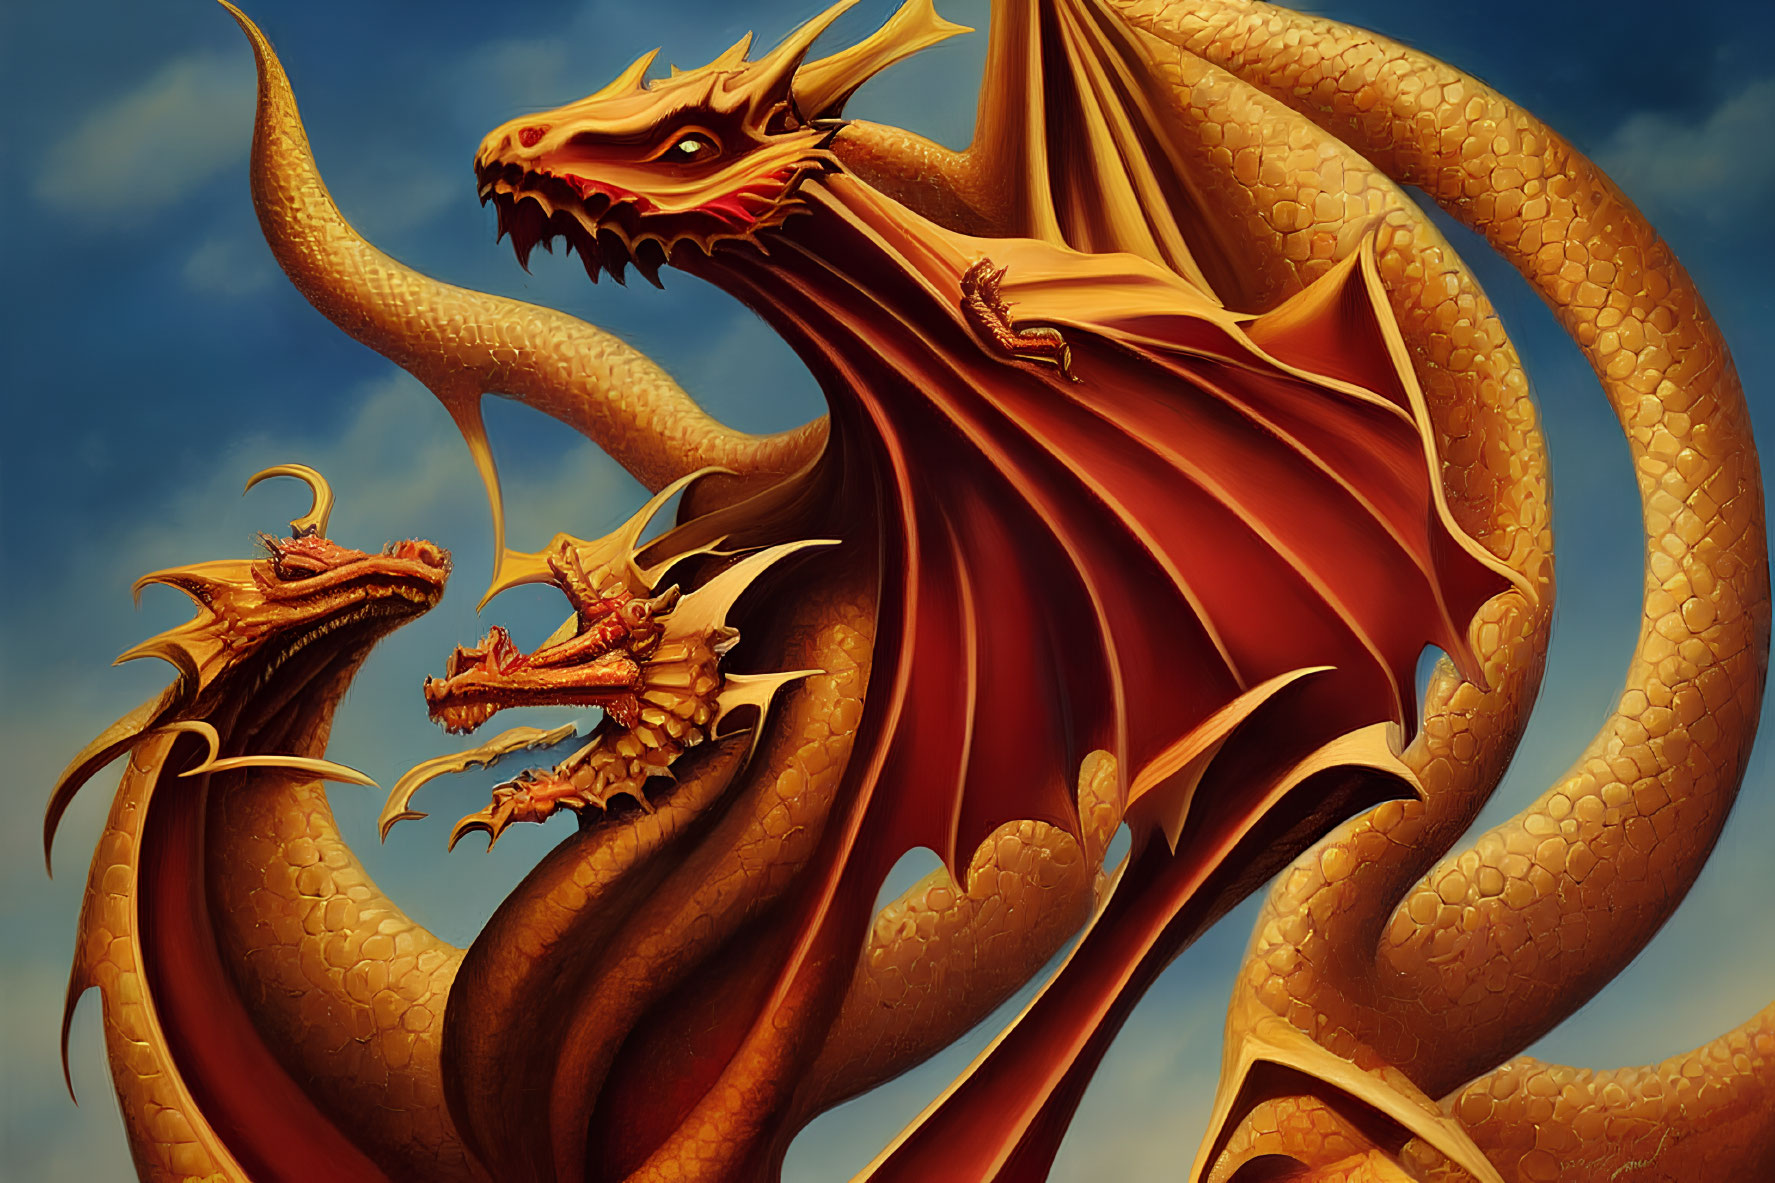 Detailed artwork: Multi-headed dragon with golden scales and orange wings in blue sky.